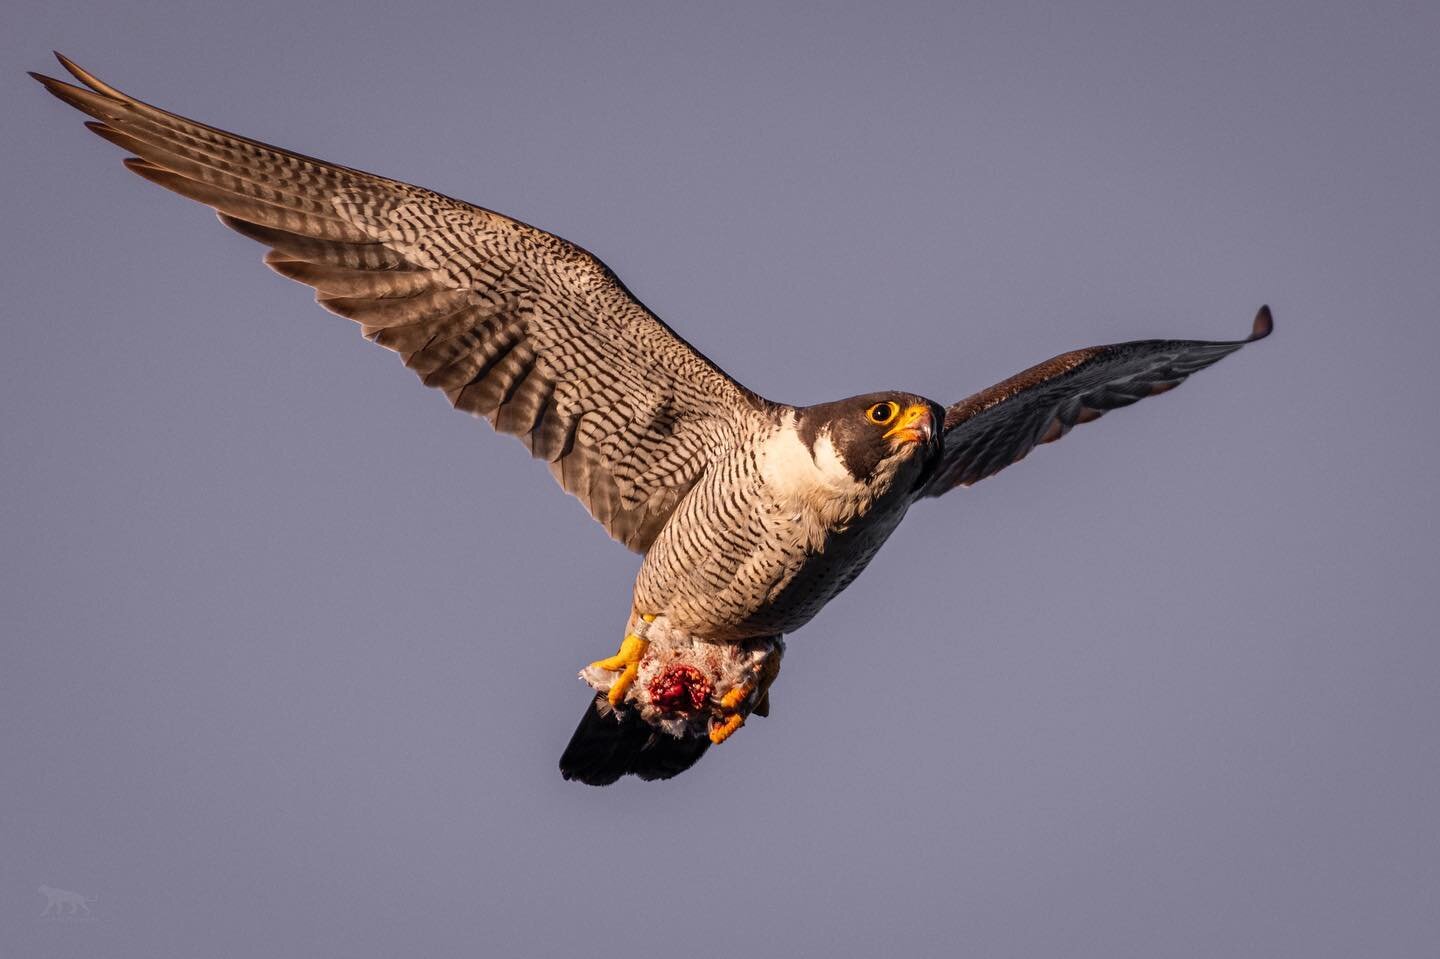 An adult peregrine falcon brings a half-eaten meal back to its young.